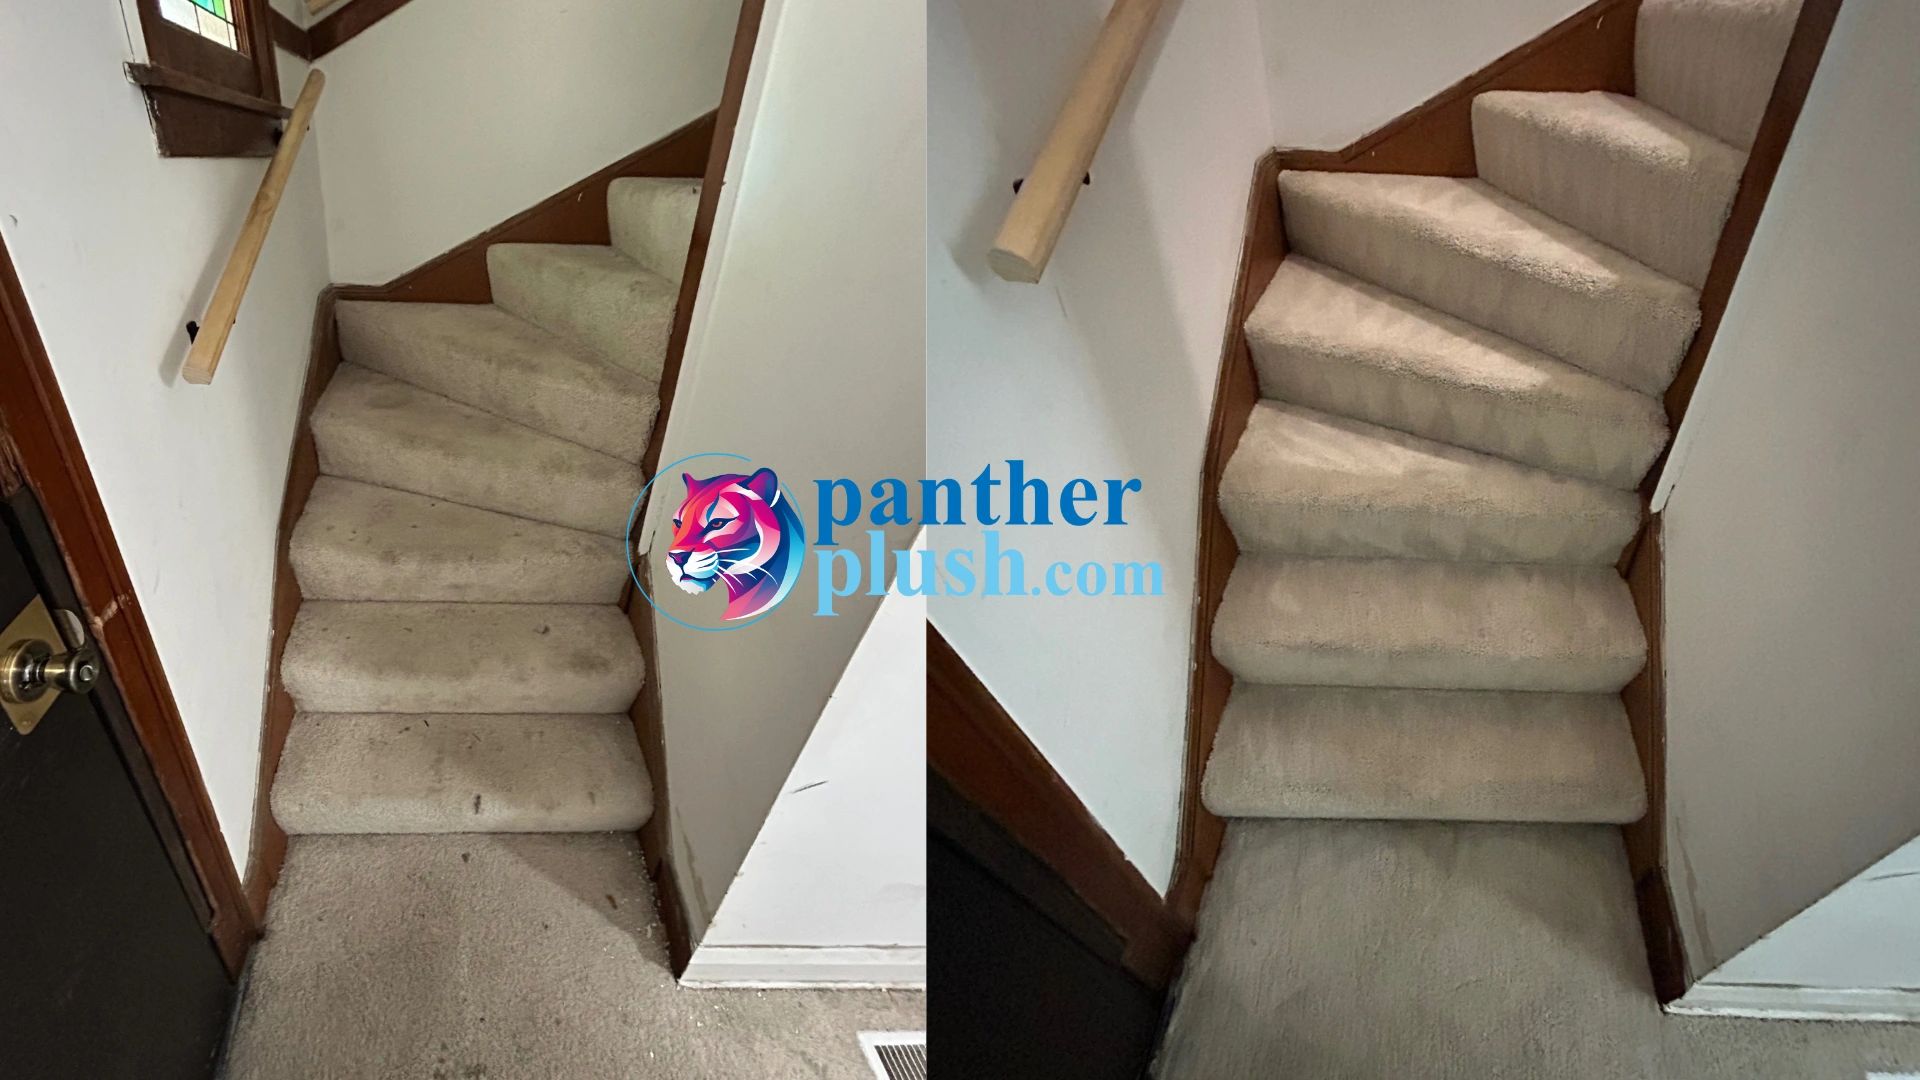 Before and after of dirty staircase being cleaned by carpet cleaning professional at Panther Plush.